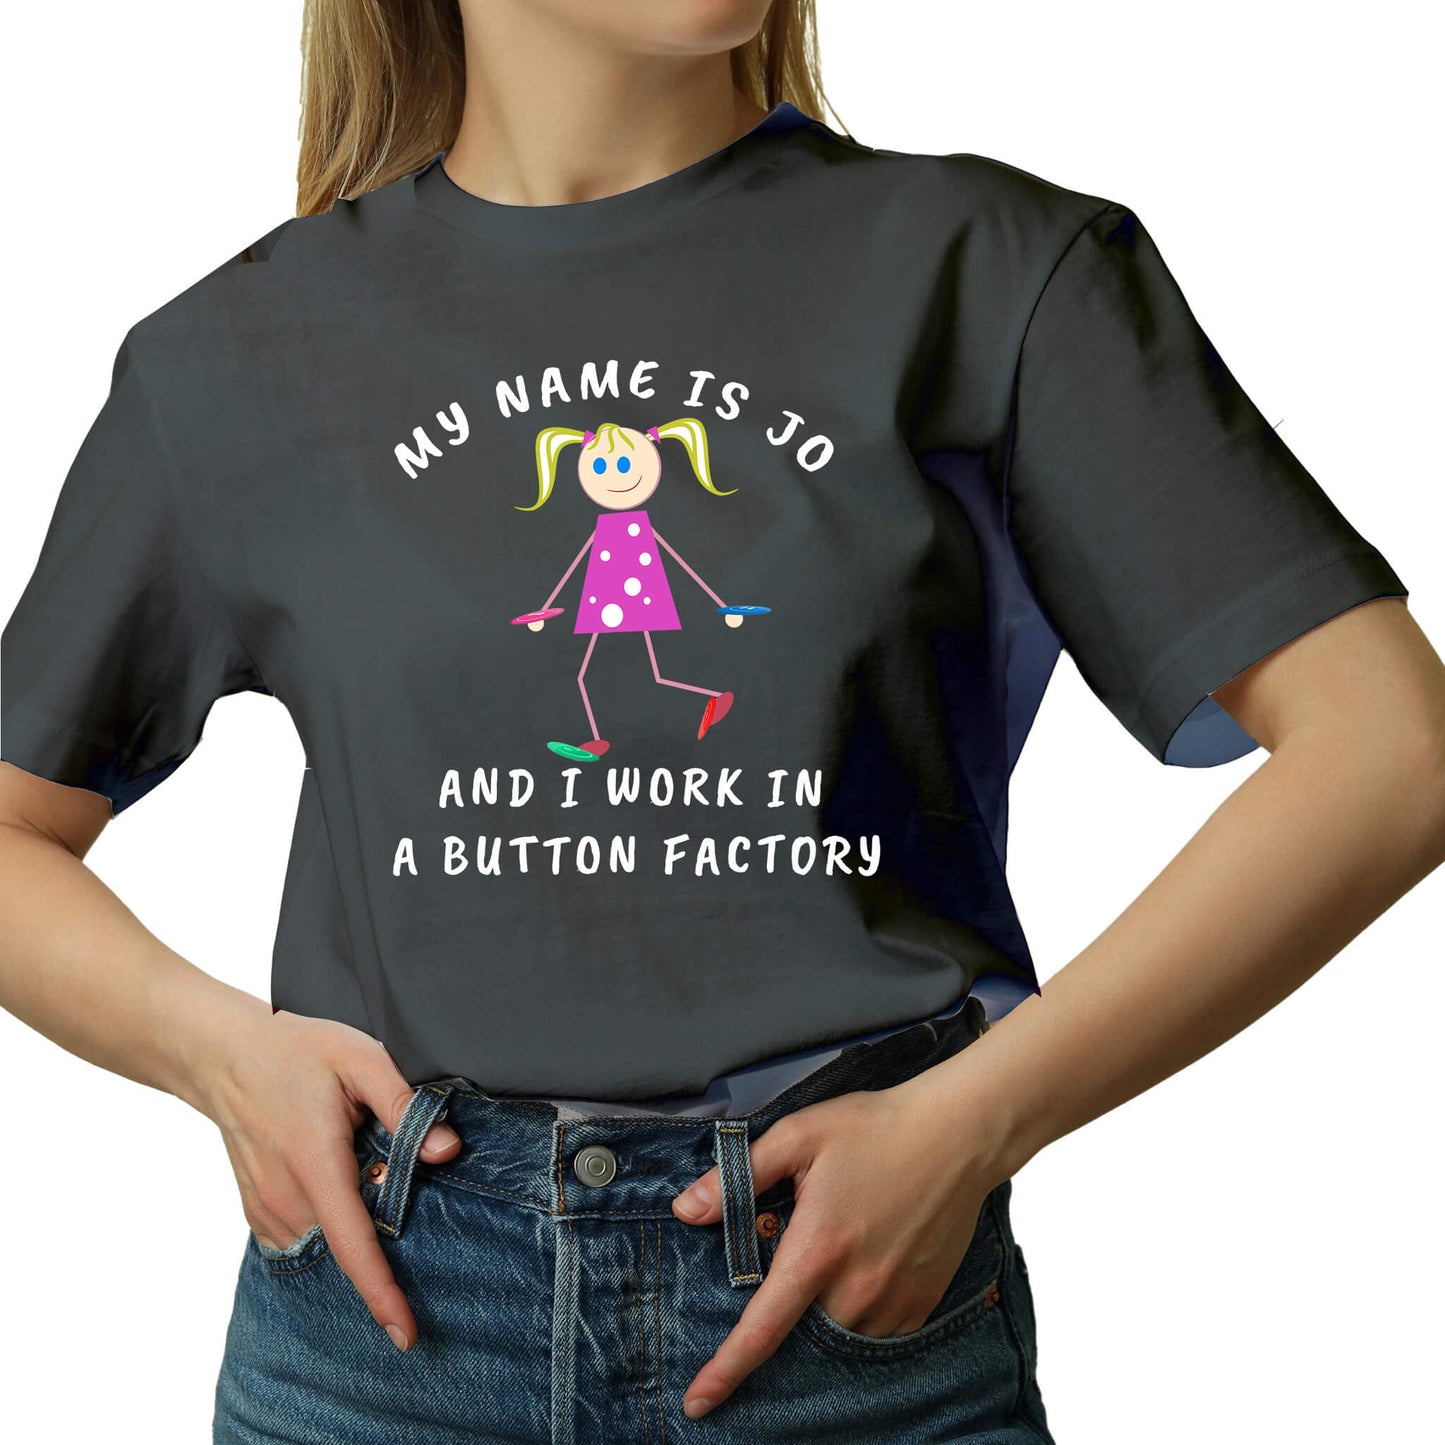 MY NAME IS JO AND I WORK IN A BUTTON FACTORY T-SHIRT charcoal